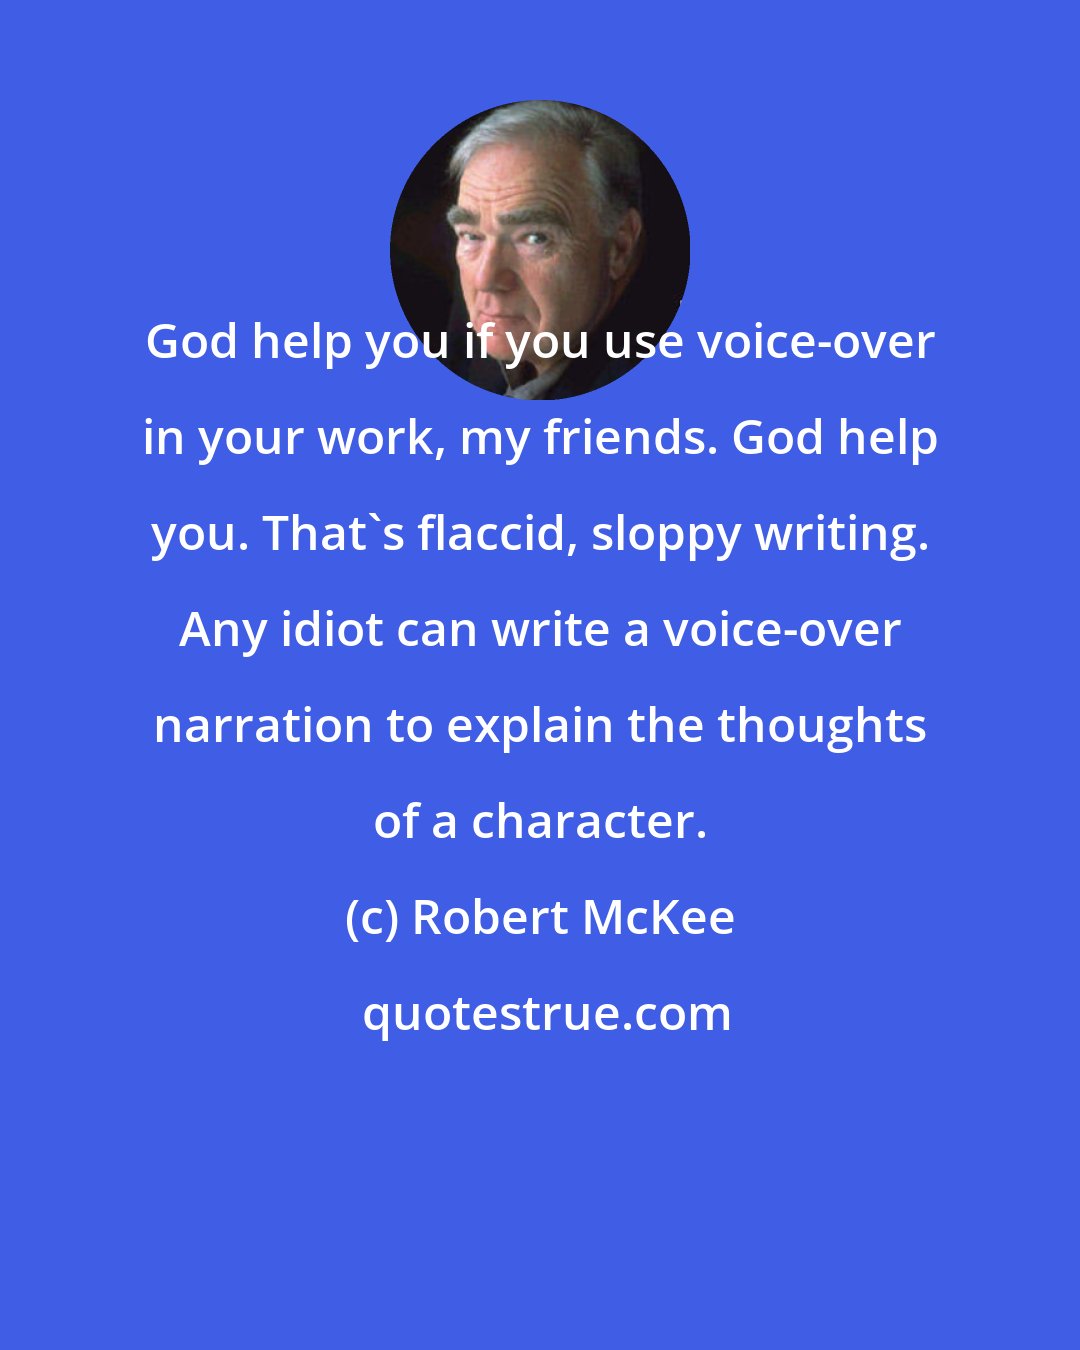 Robert McKee: God help you if you use voice-over in your work, my friends. God help you. That's flaccid, sloppy writing. Any idiot can write a voice-over narration to explain the thoughts of a character.